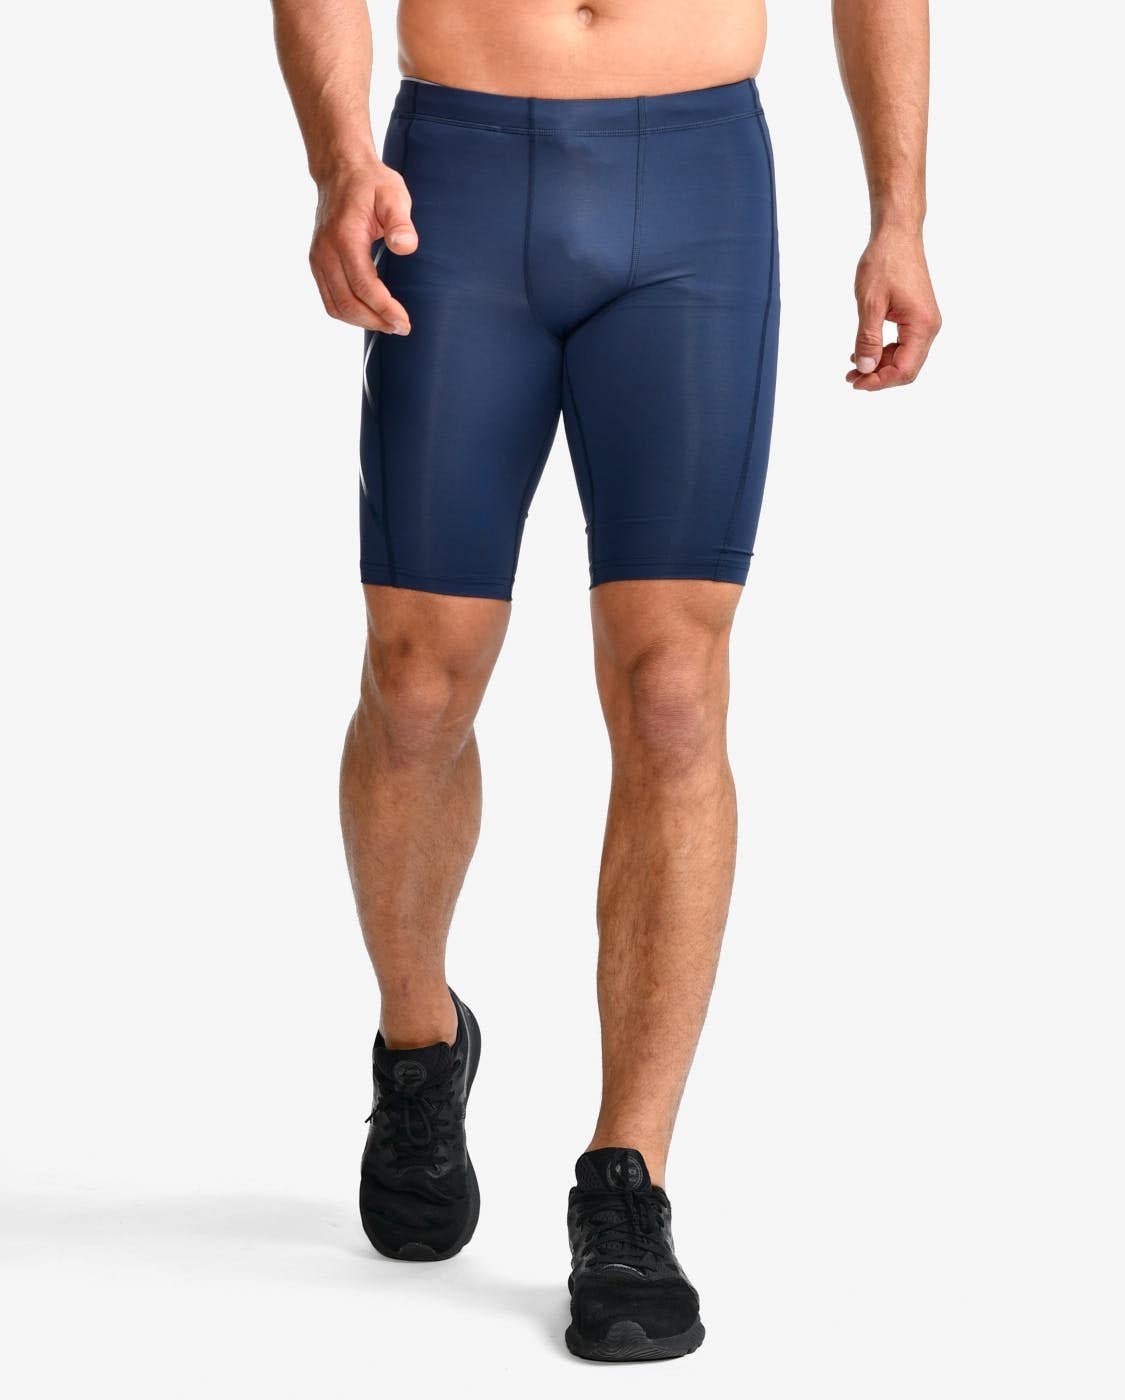 2XU South Africa - Men's Core Compression Shorts - Navy - Navy/Navy